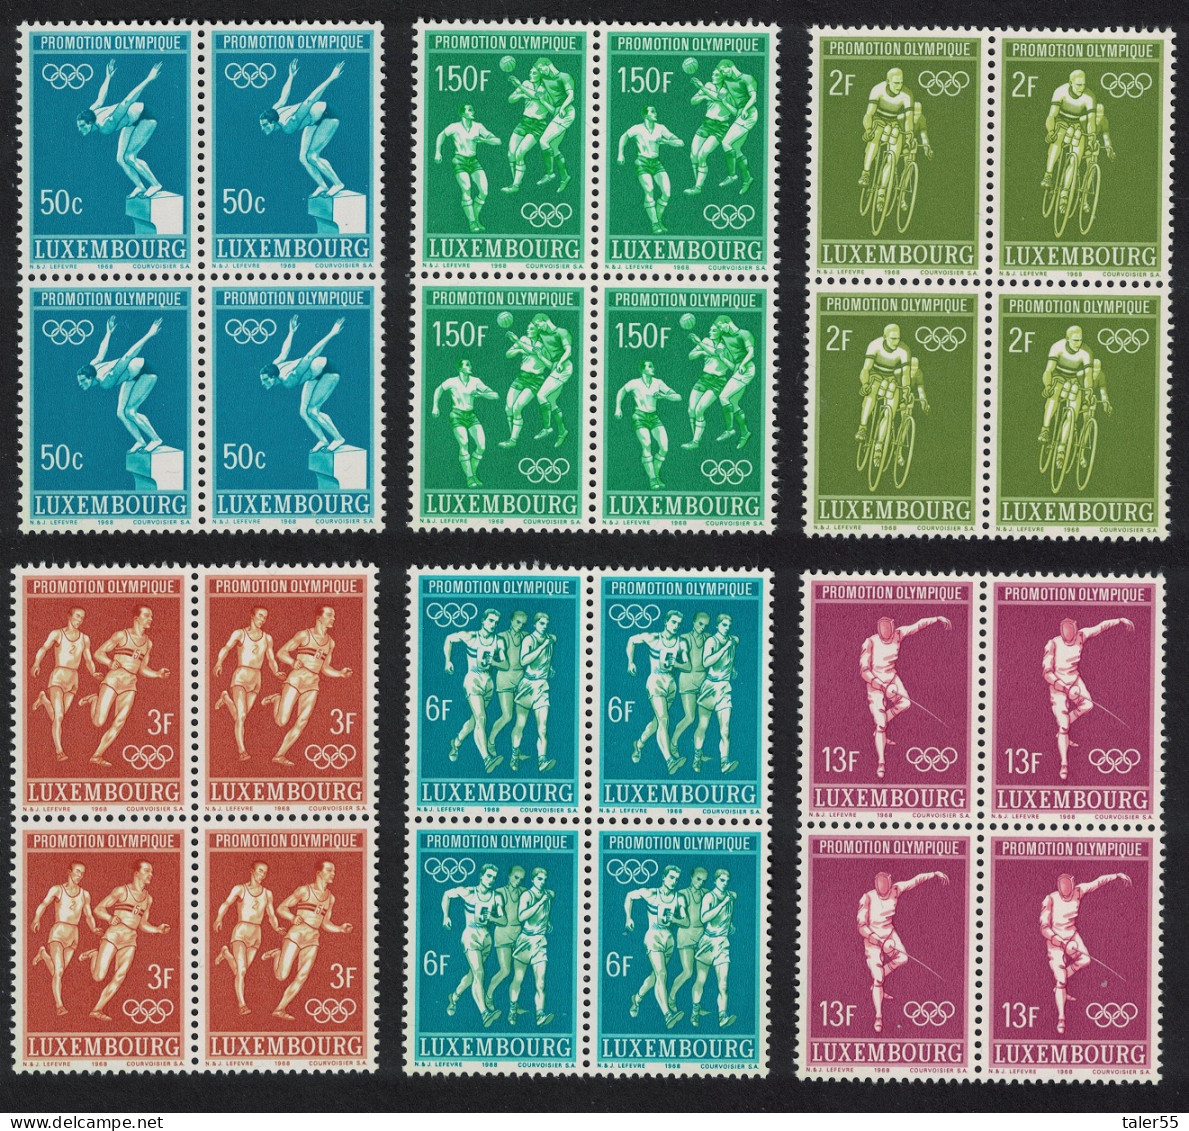 Luxembourg Football Cycling Olympic Games 6v Blocks Of 4 1968 MNH SG#815-820 MI#765-770 - Nuevos